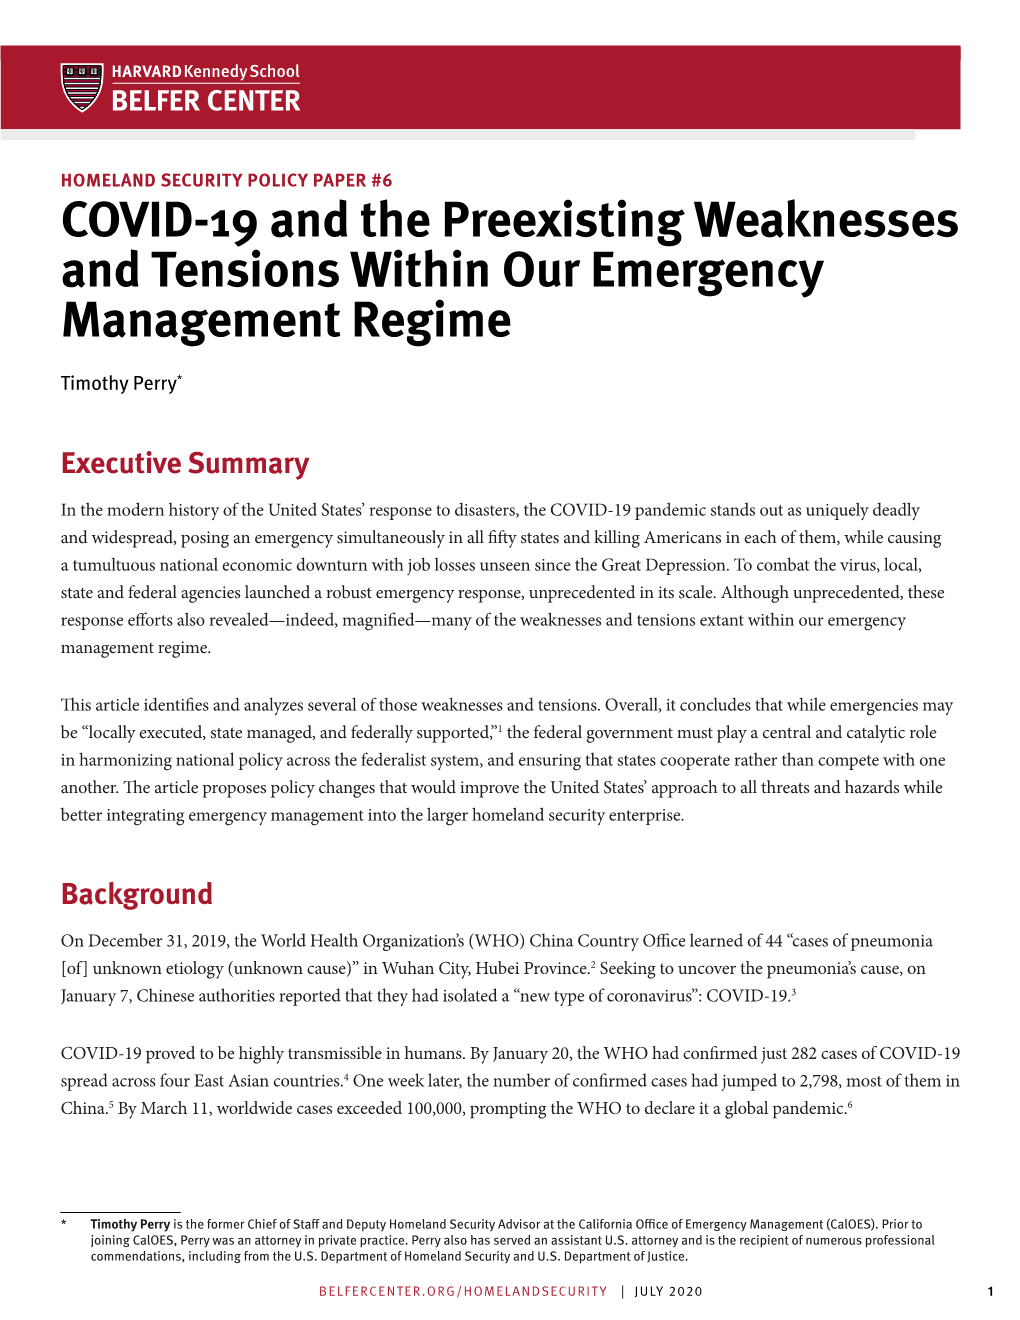 COVID-19 and the Preexisting Weaknesses and Tensions Within Our Emergency Management Regime